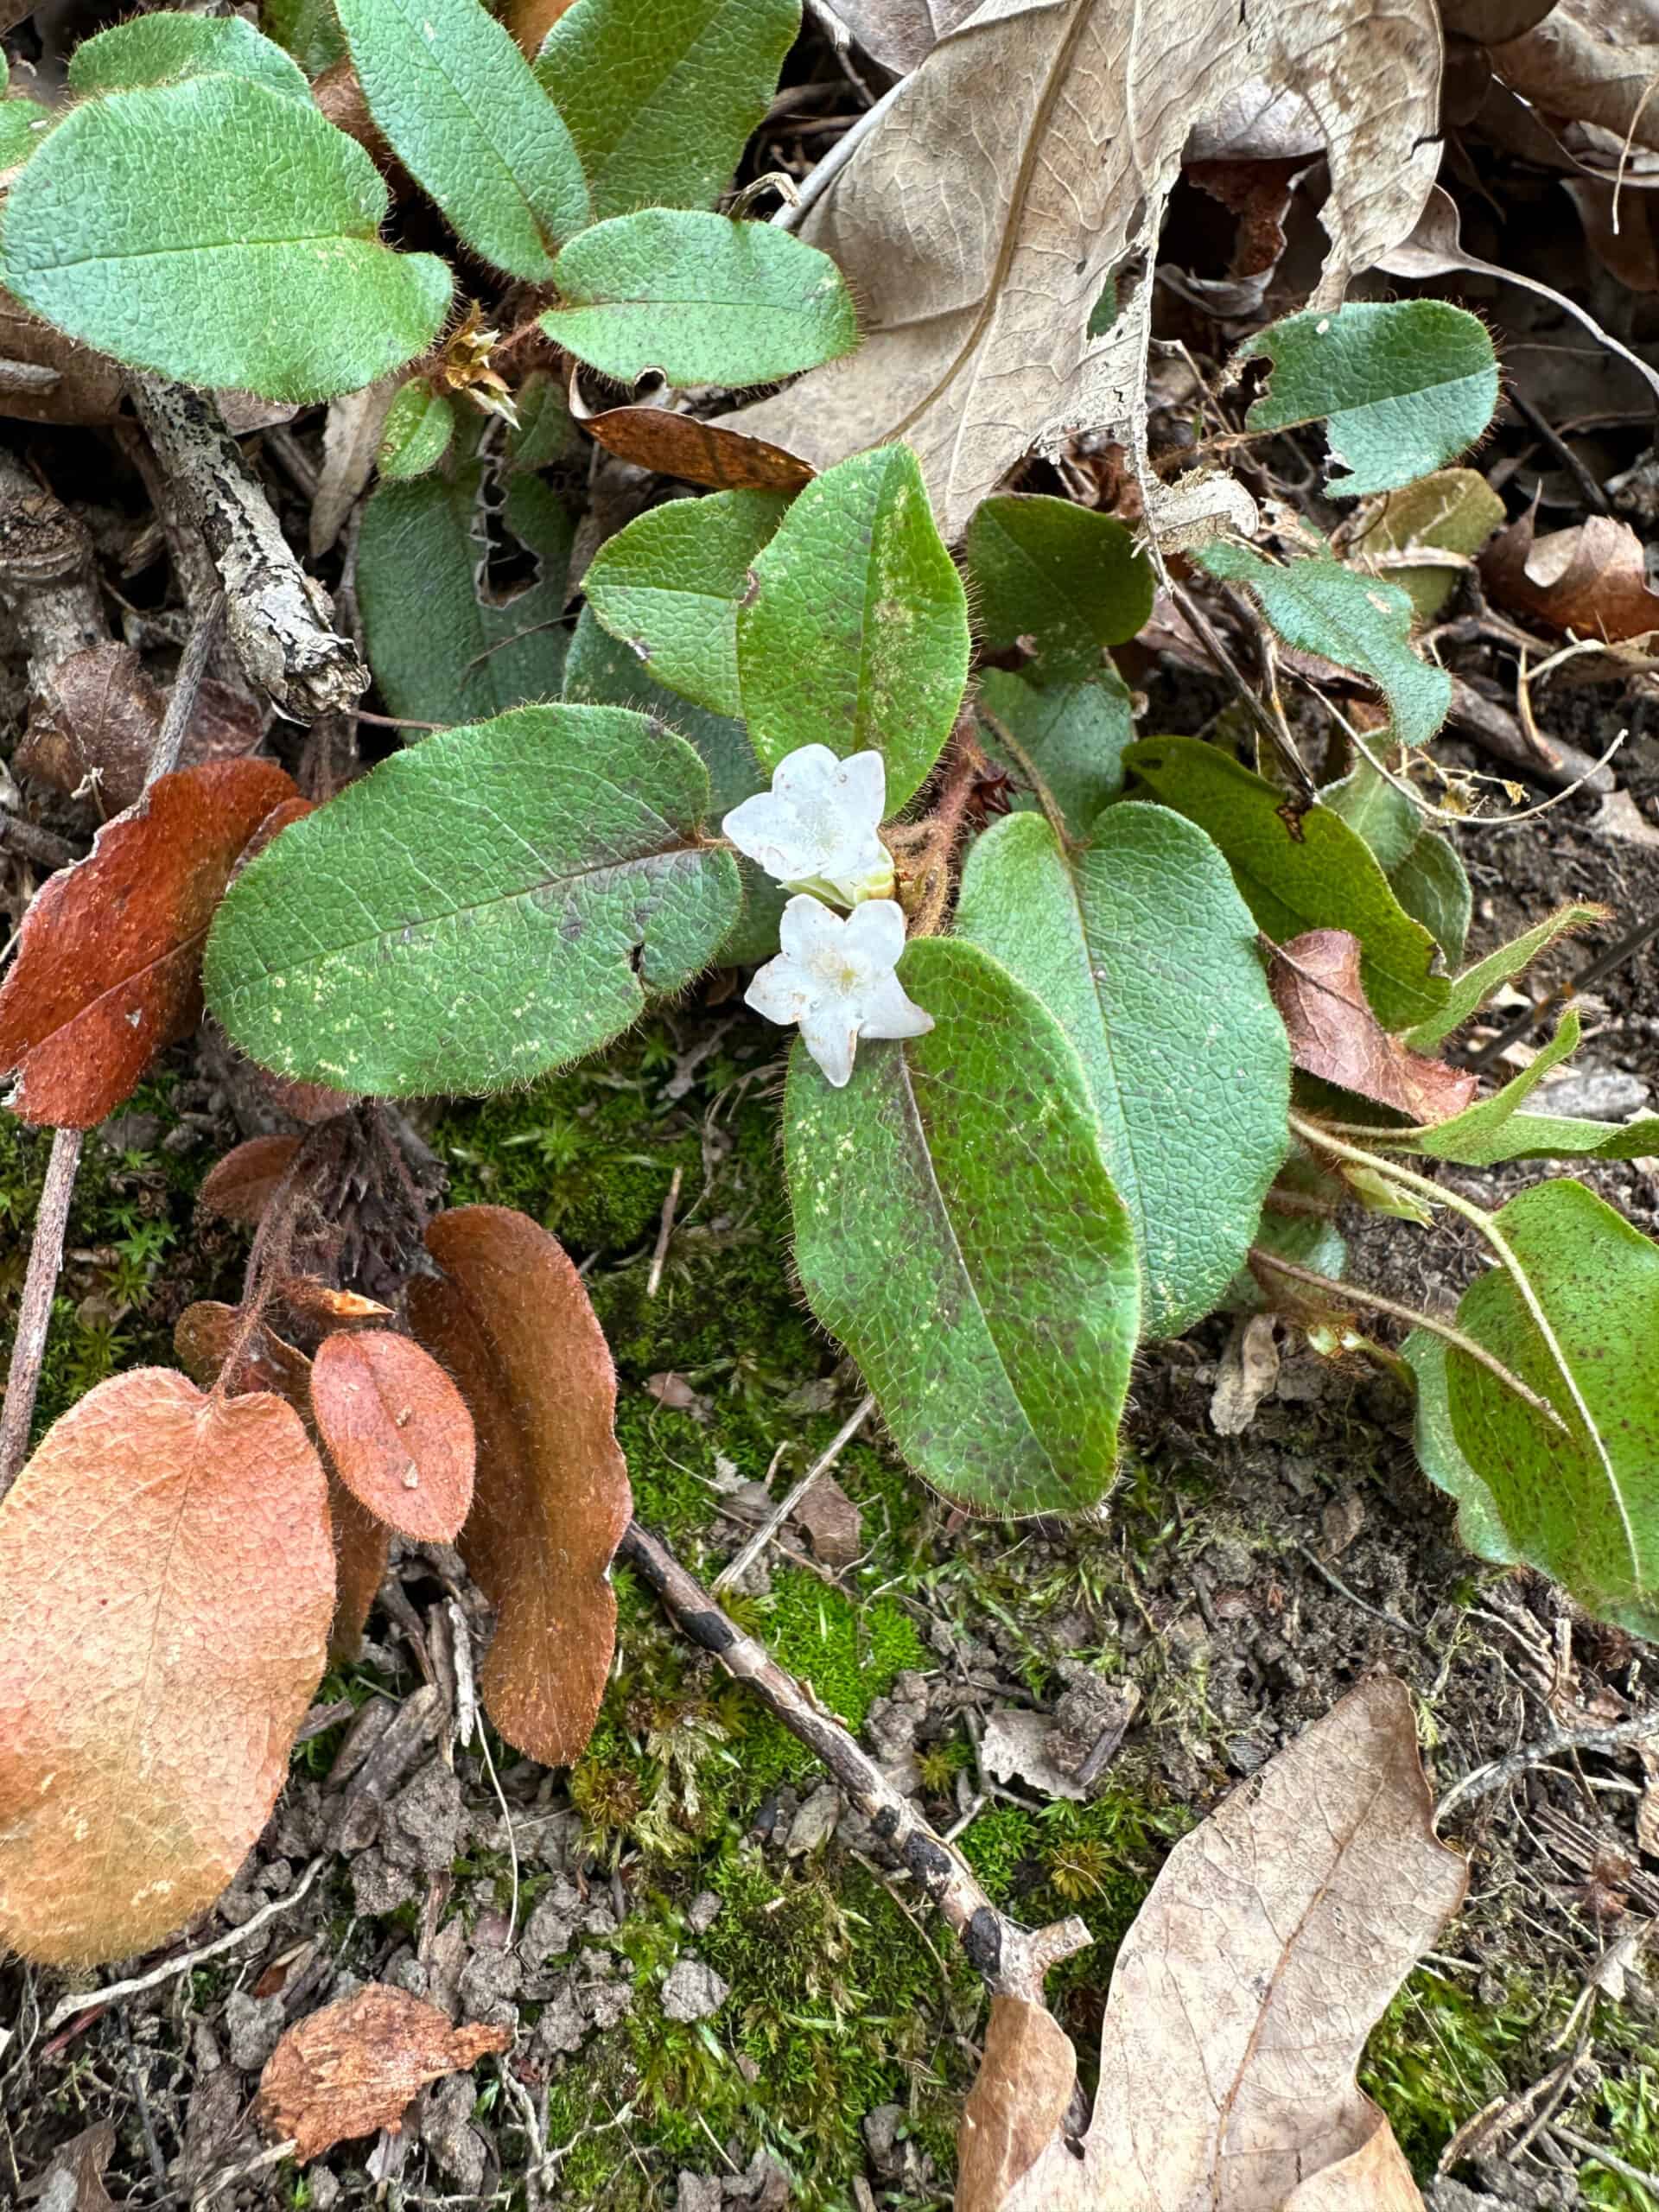 Small white flowers of trailing arbutus